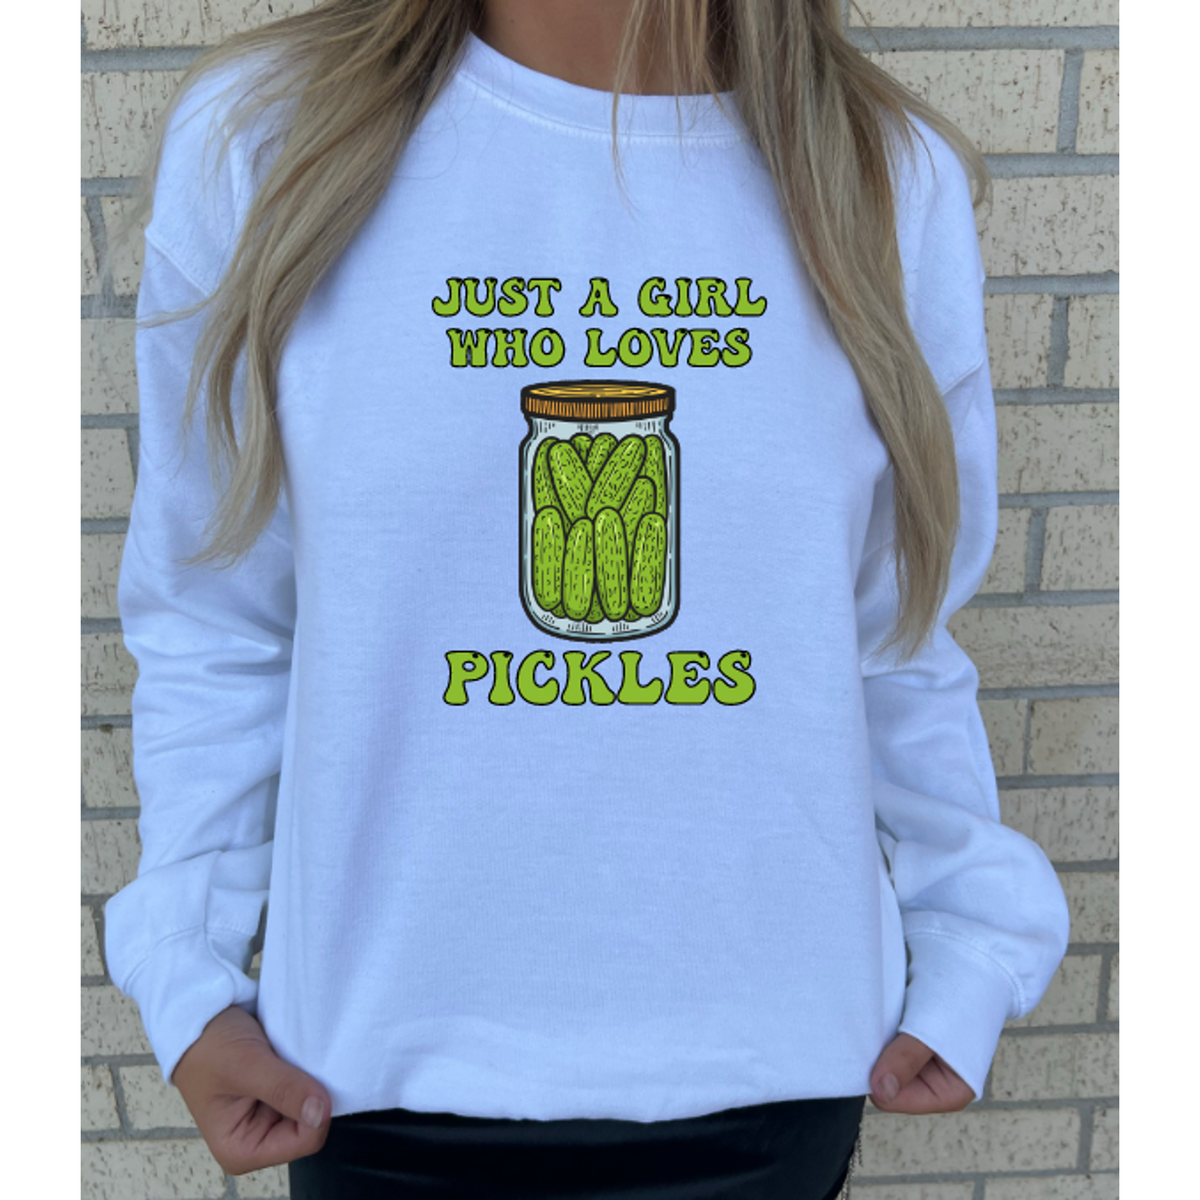 Just a Girl who loves Pickles Tee or Sweatshirt